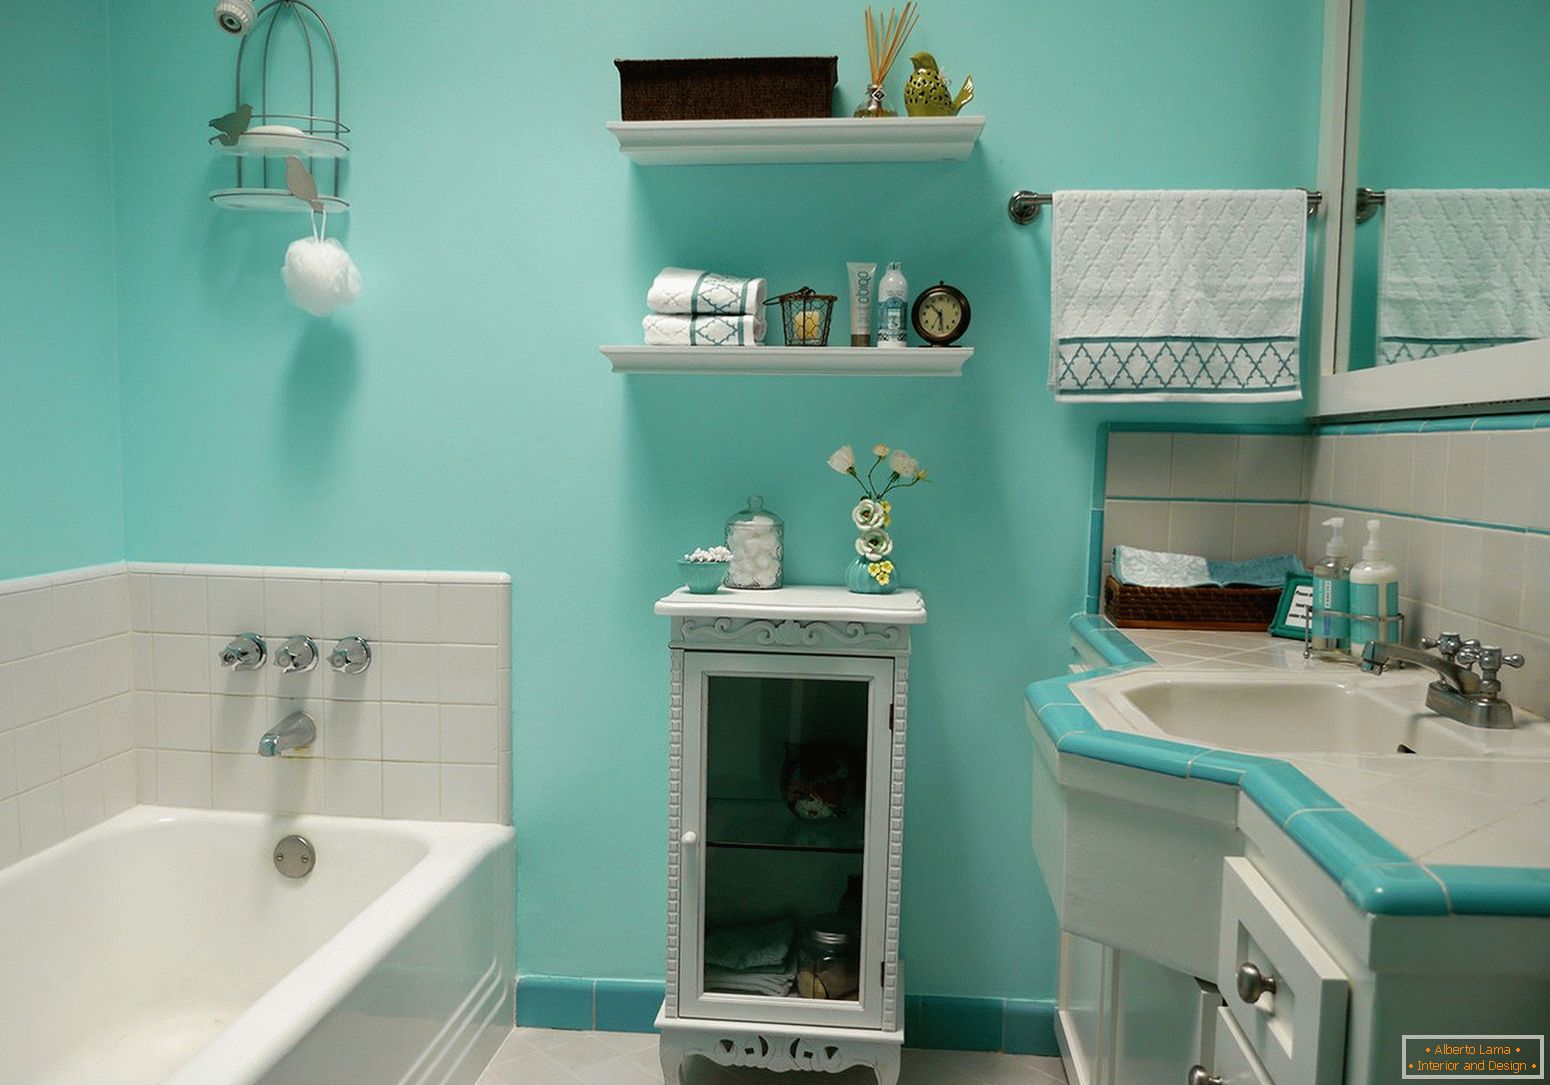 Turquoise walls in the bathroom